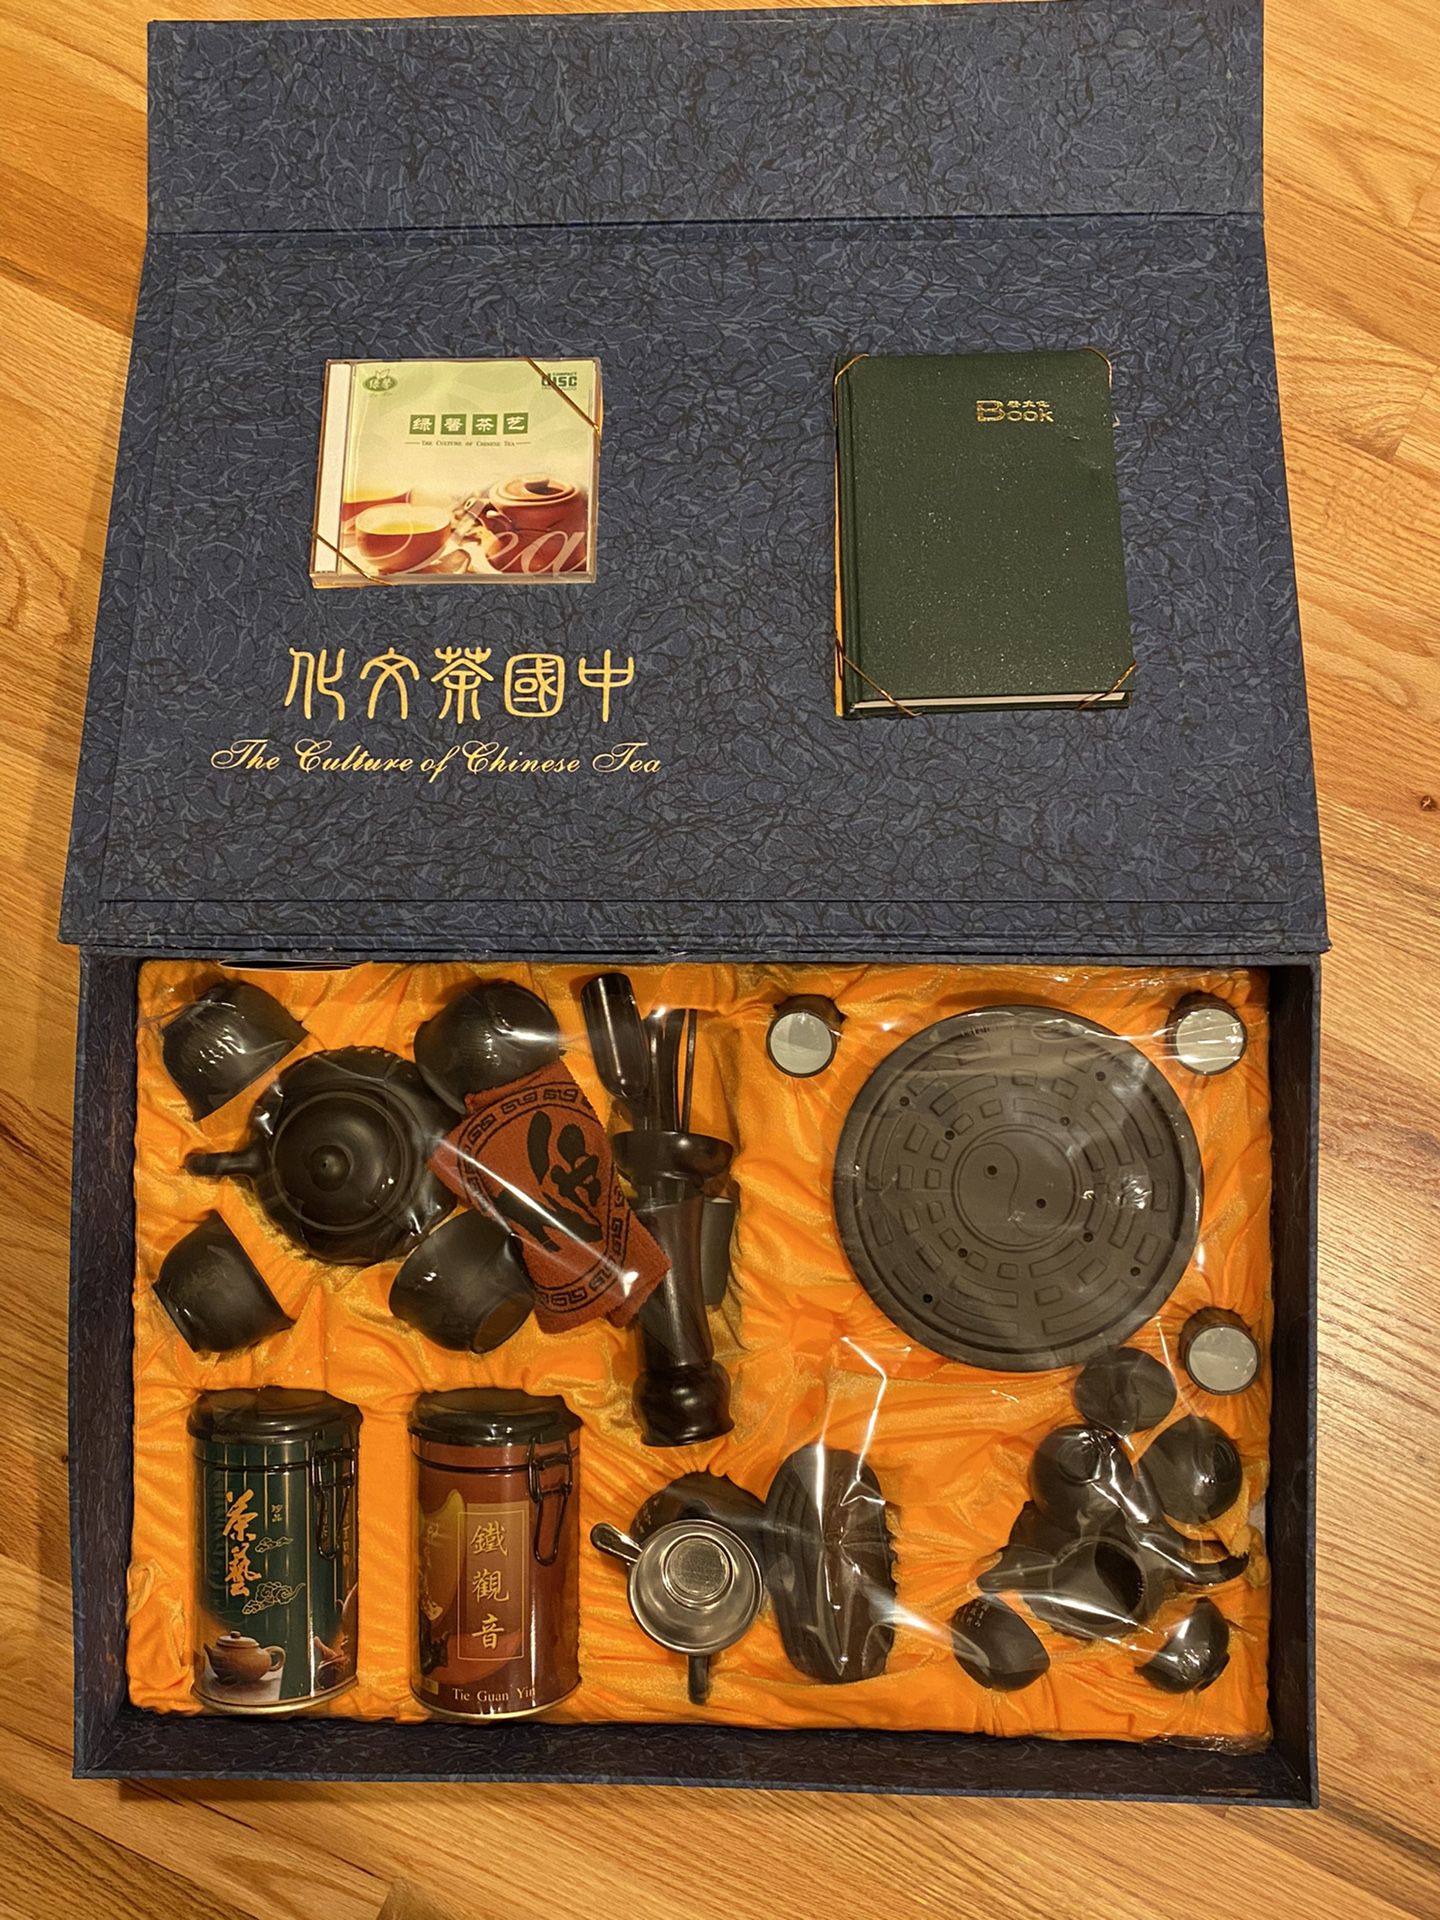 The culture of Chinese tea set